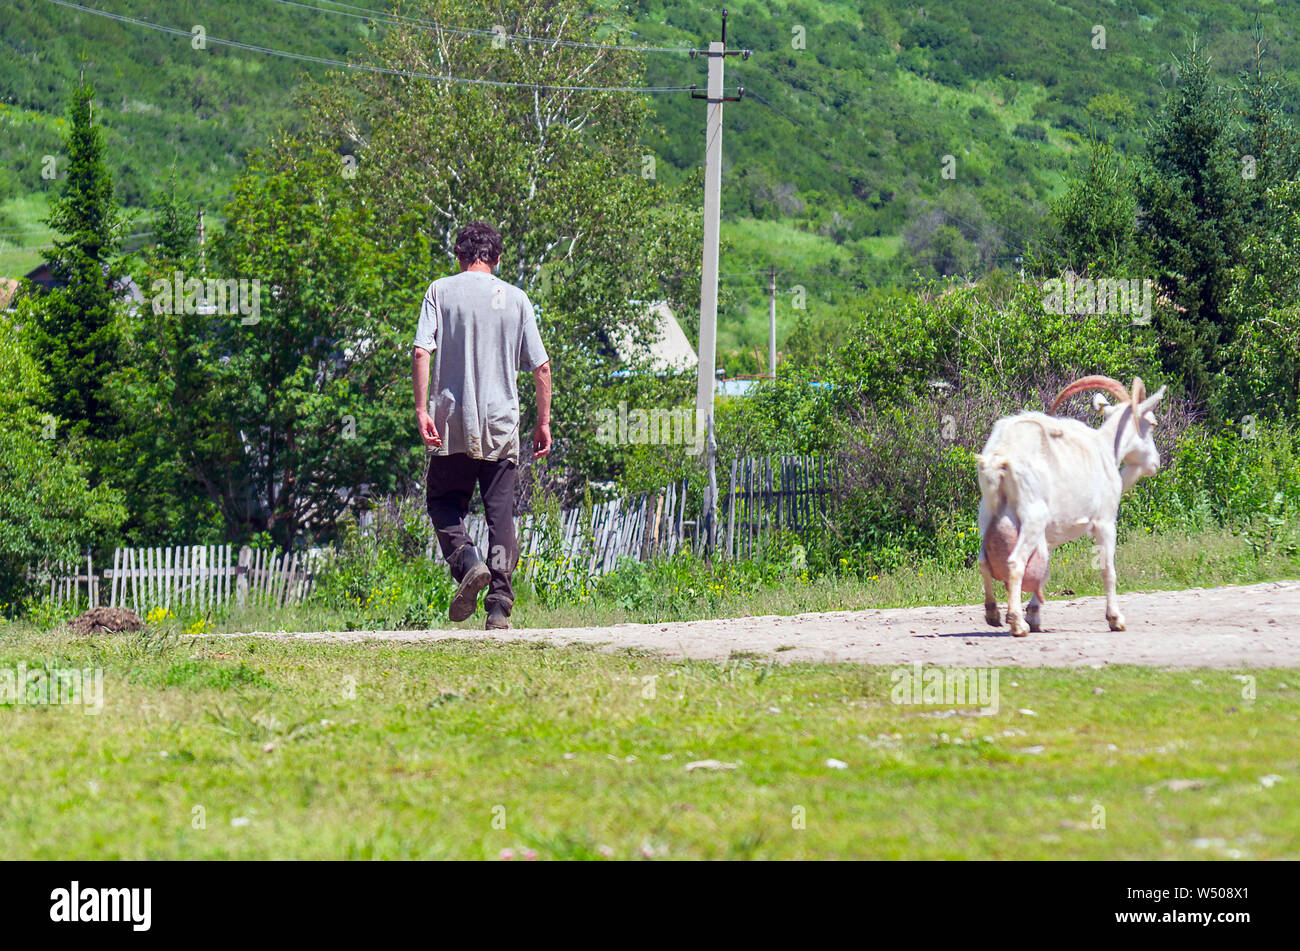 A Farm Worker Going Down the Rural Road and a White Nanny Goat Going Opposite Way on a Sunny Summer Day. Stock Photo